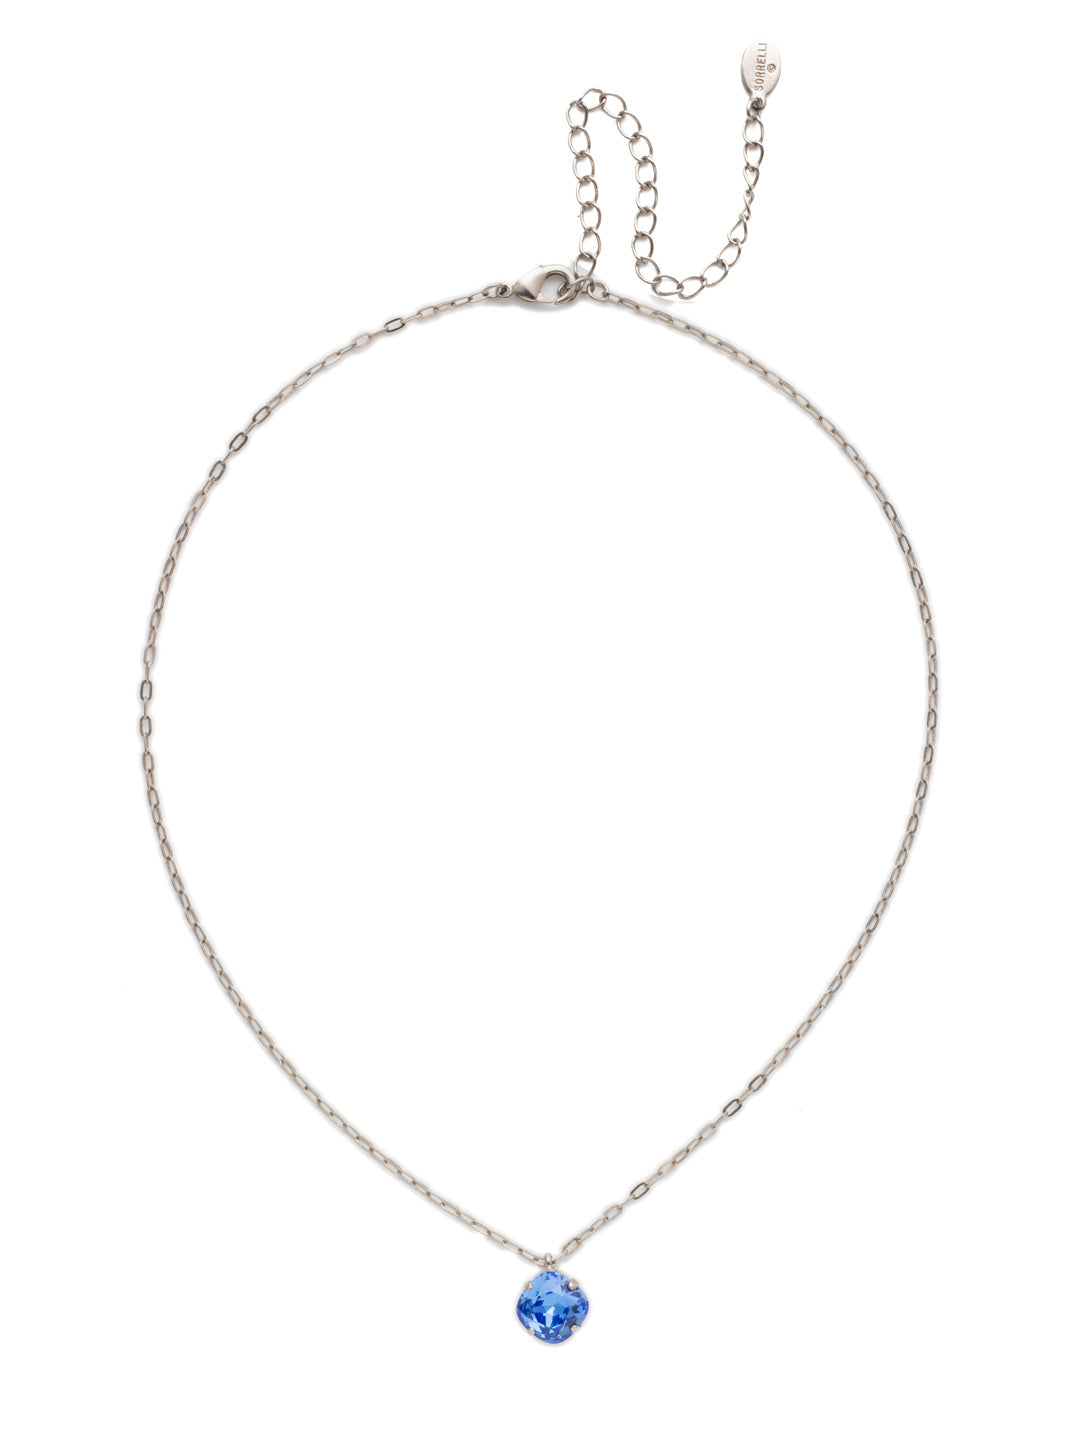 Siren Pendant Necklace - NEP22ASSAP - <p>With a cushion-cut crystal and delicate chain, the Siren Pendant  will add a litle sparkle to your everyday look. From Sorrelli's Sapphire collection in our Antique Silver-tone finish.</p>